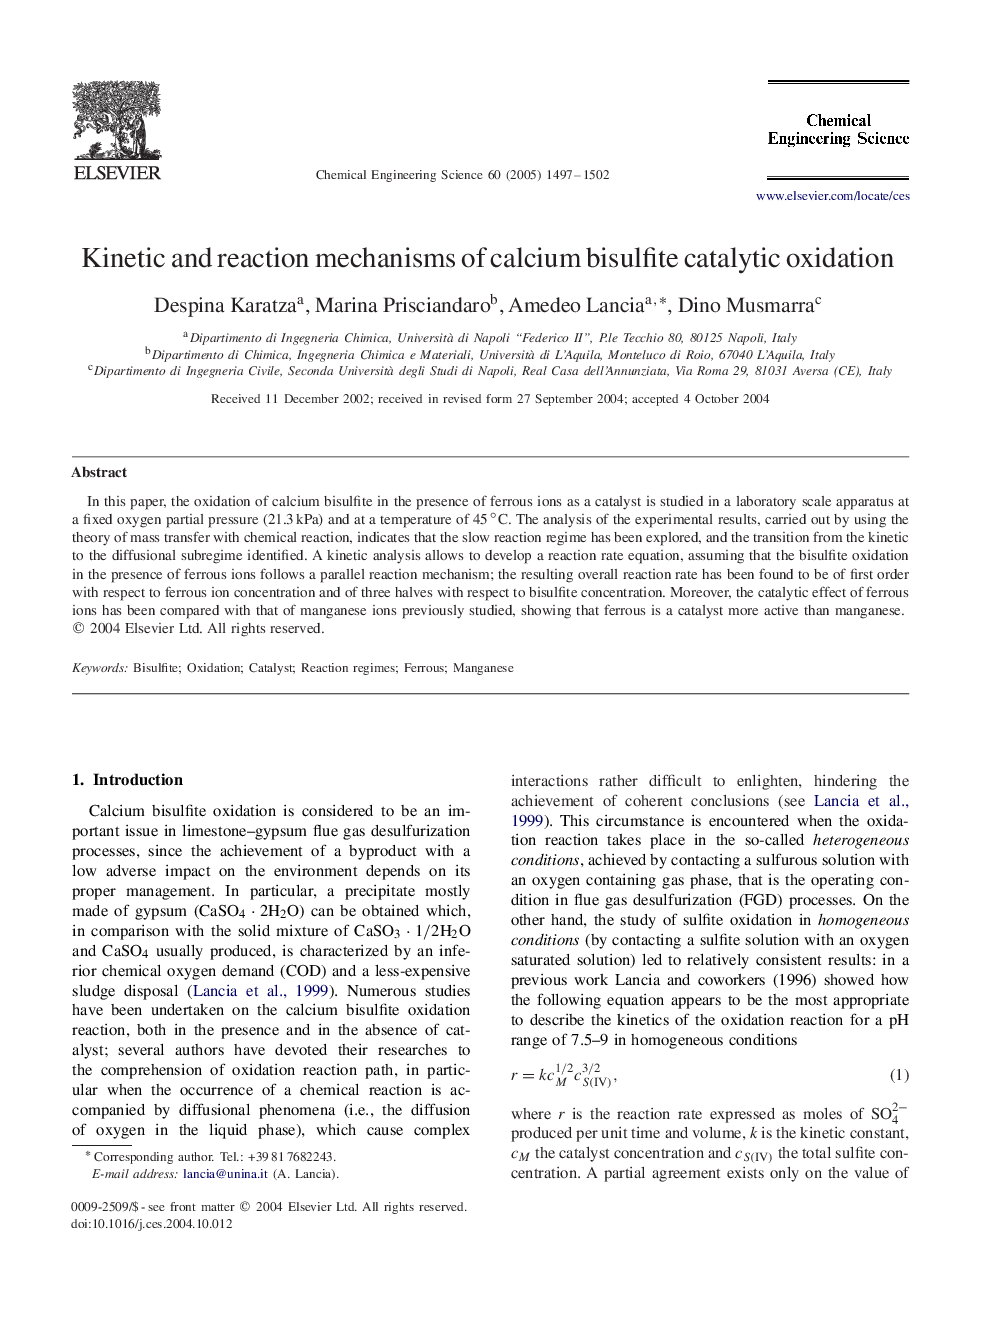 Kinetic and reaction mechanisms of calcium bisulfite catalytic oxidation